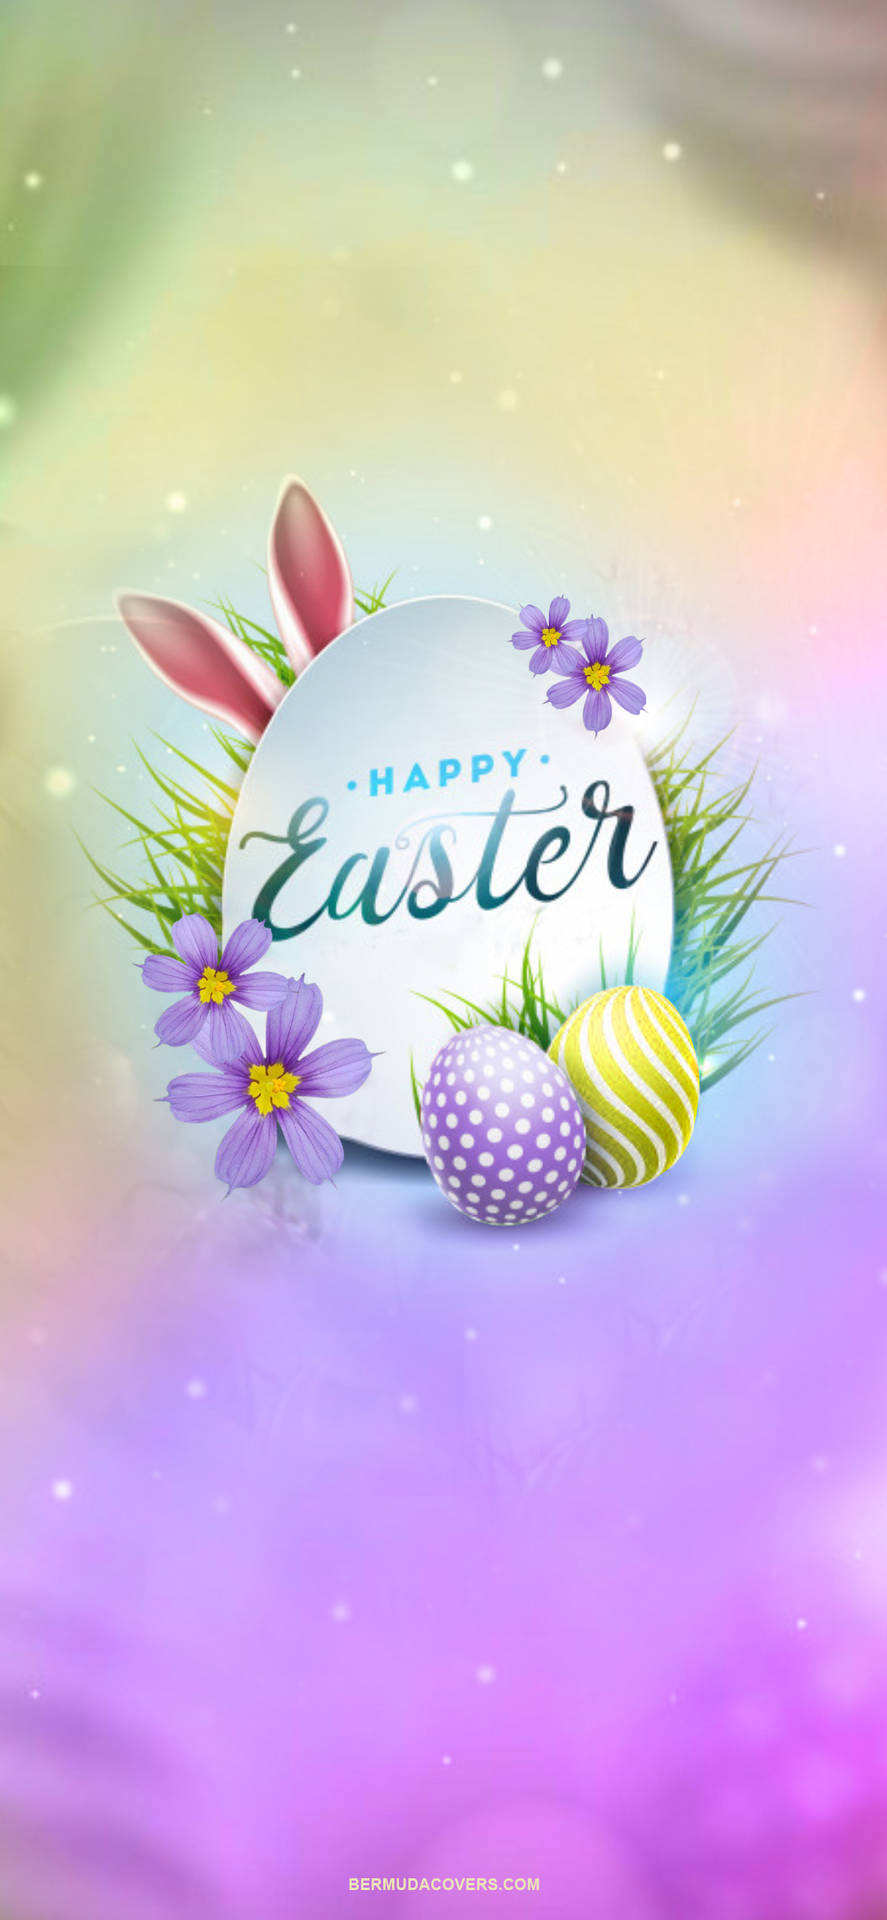 "Celebrate this Easter with a new phone!" Wallpaper